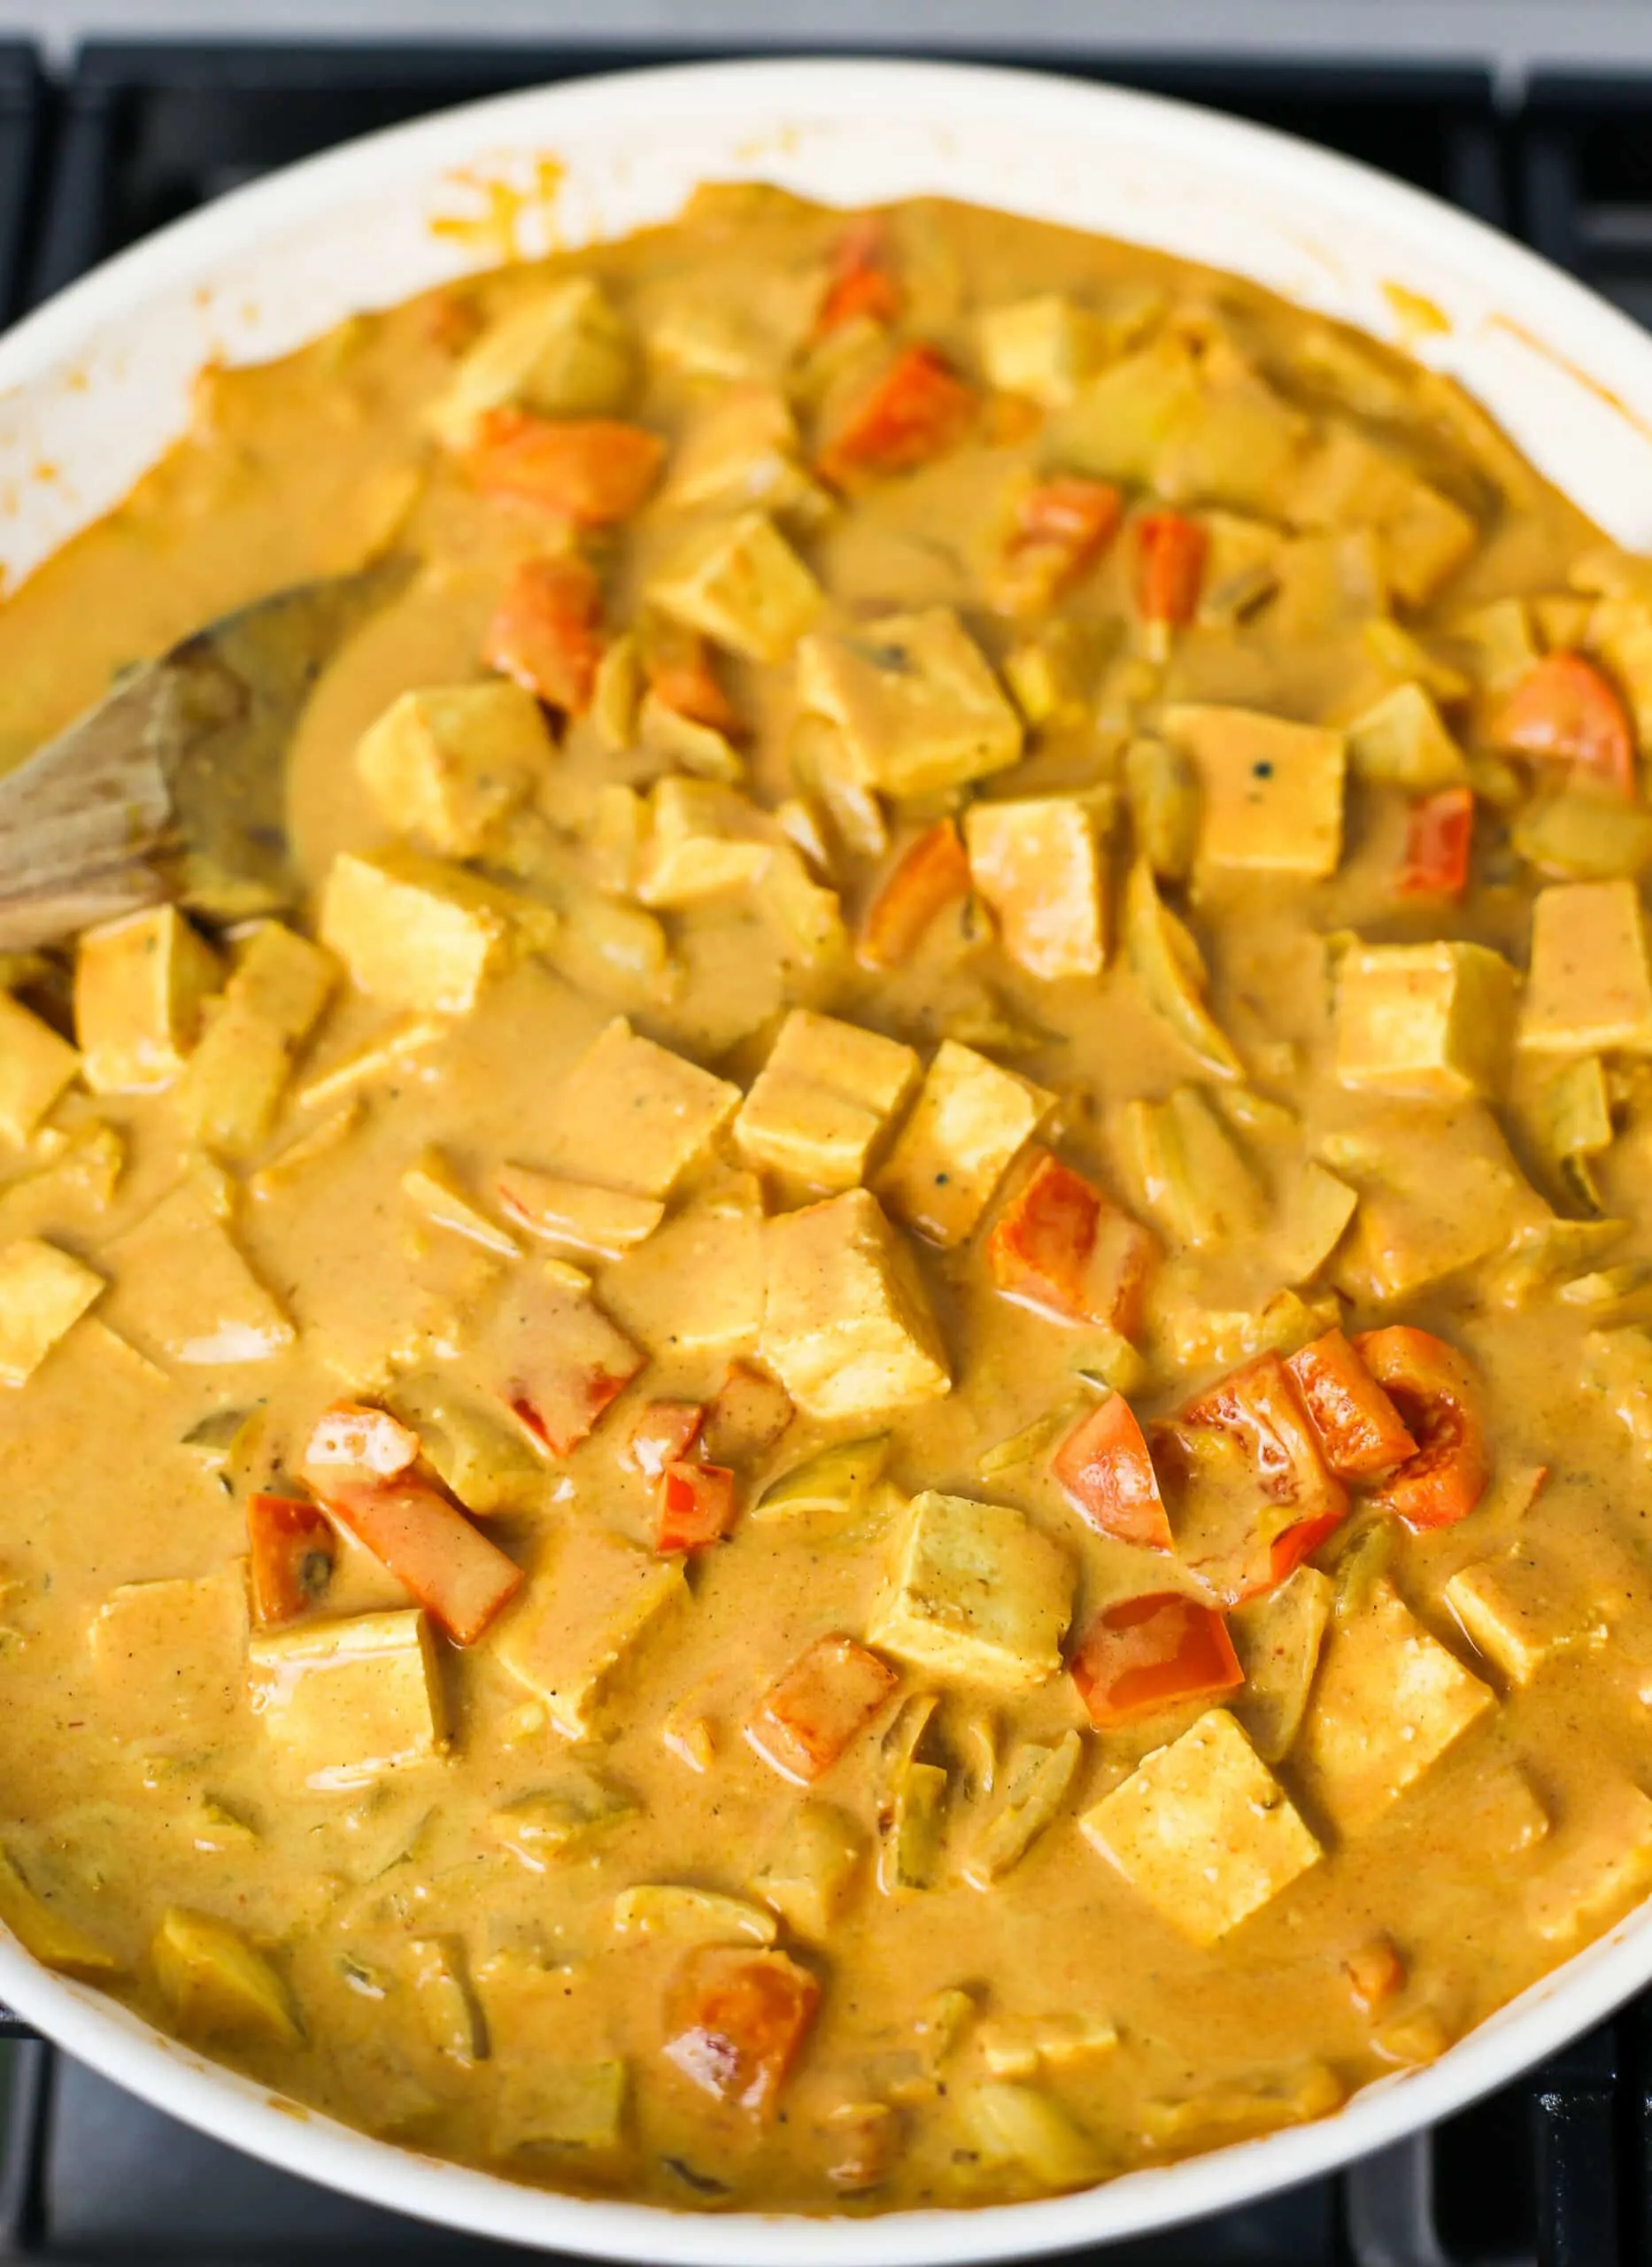 Creamy coconut curry sauce mixed with cubed tofu, and vegetables in a large fry pan.